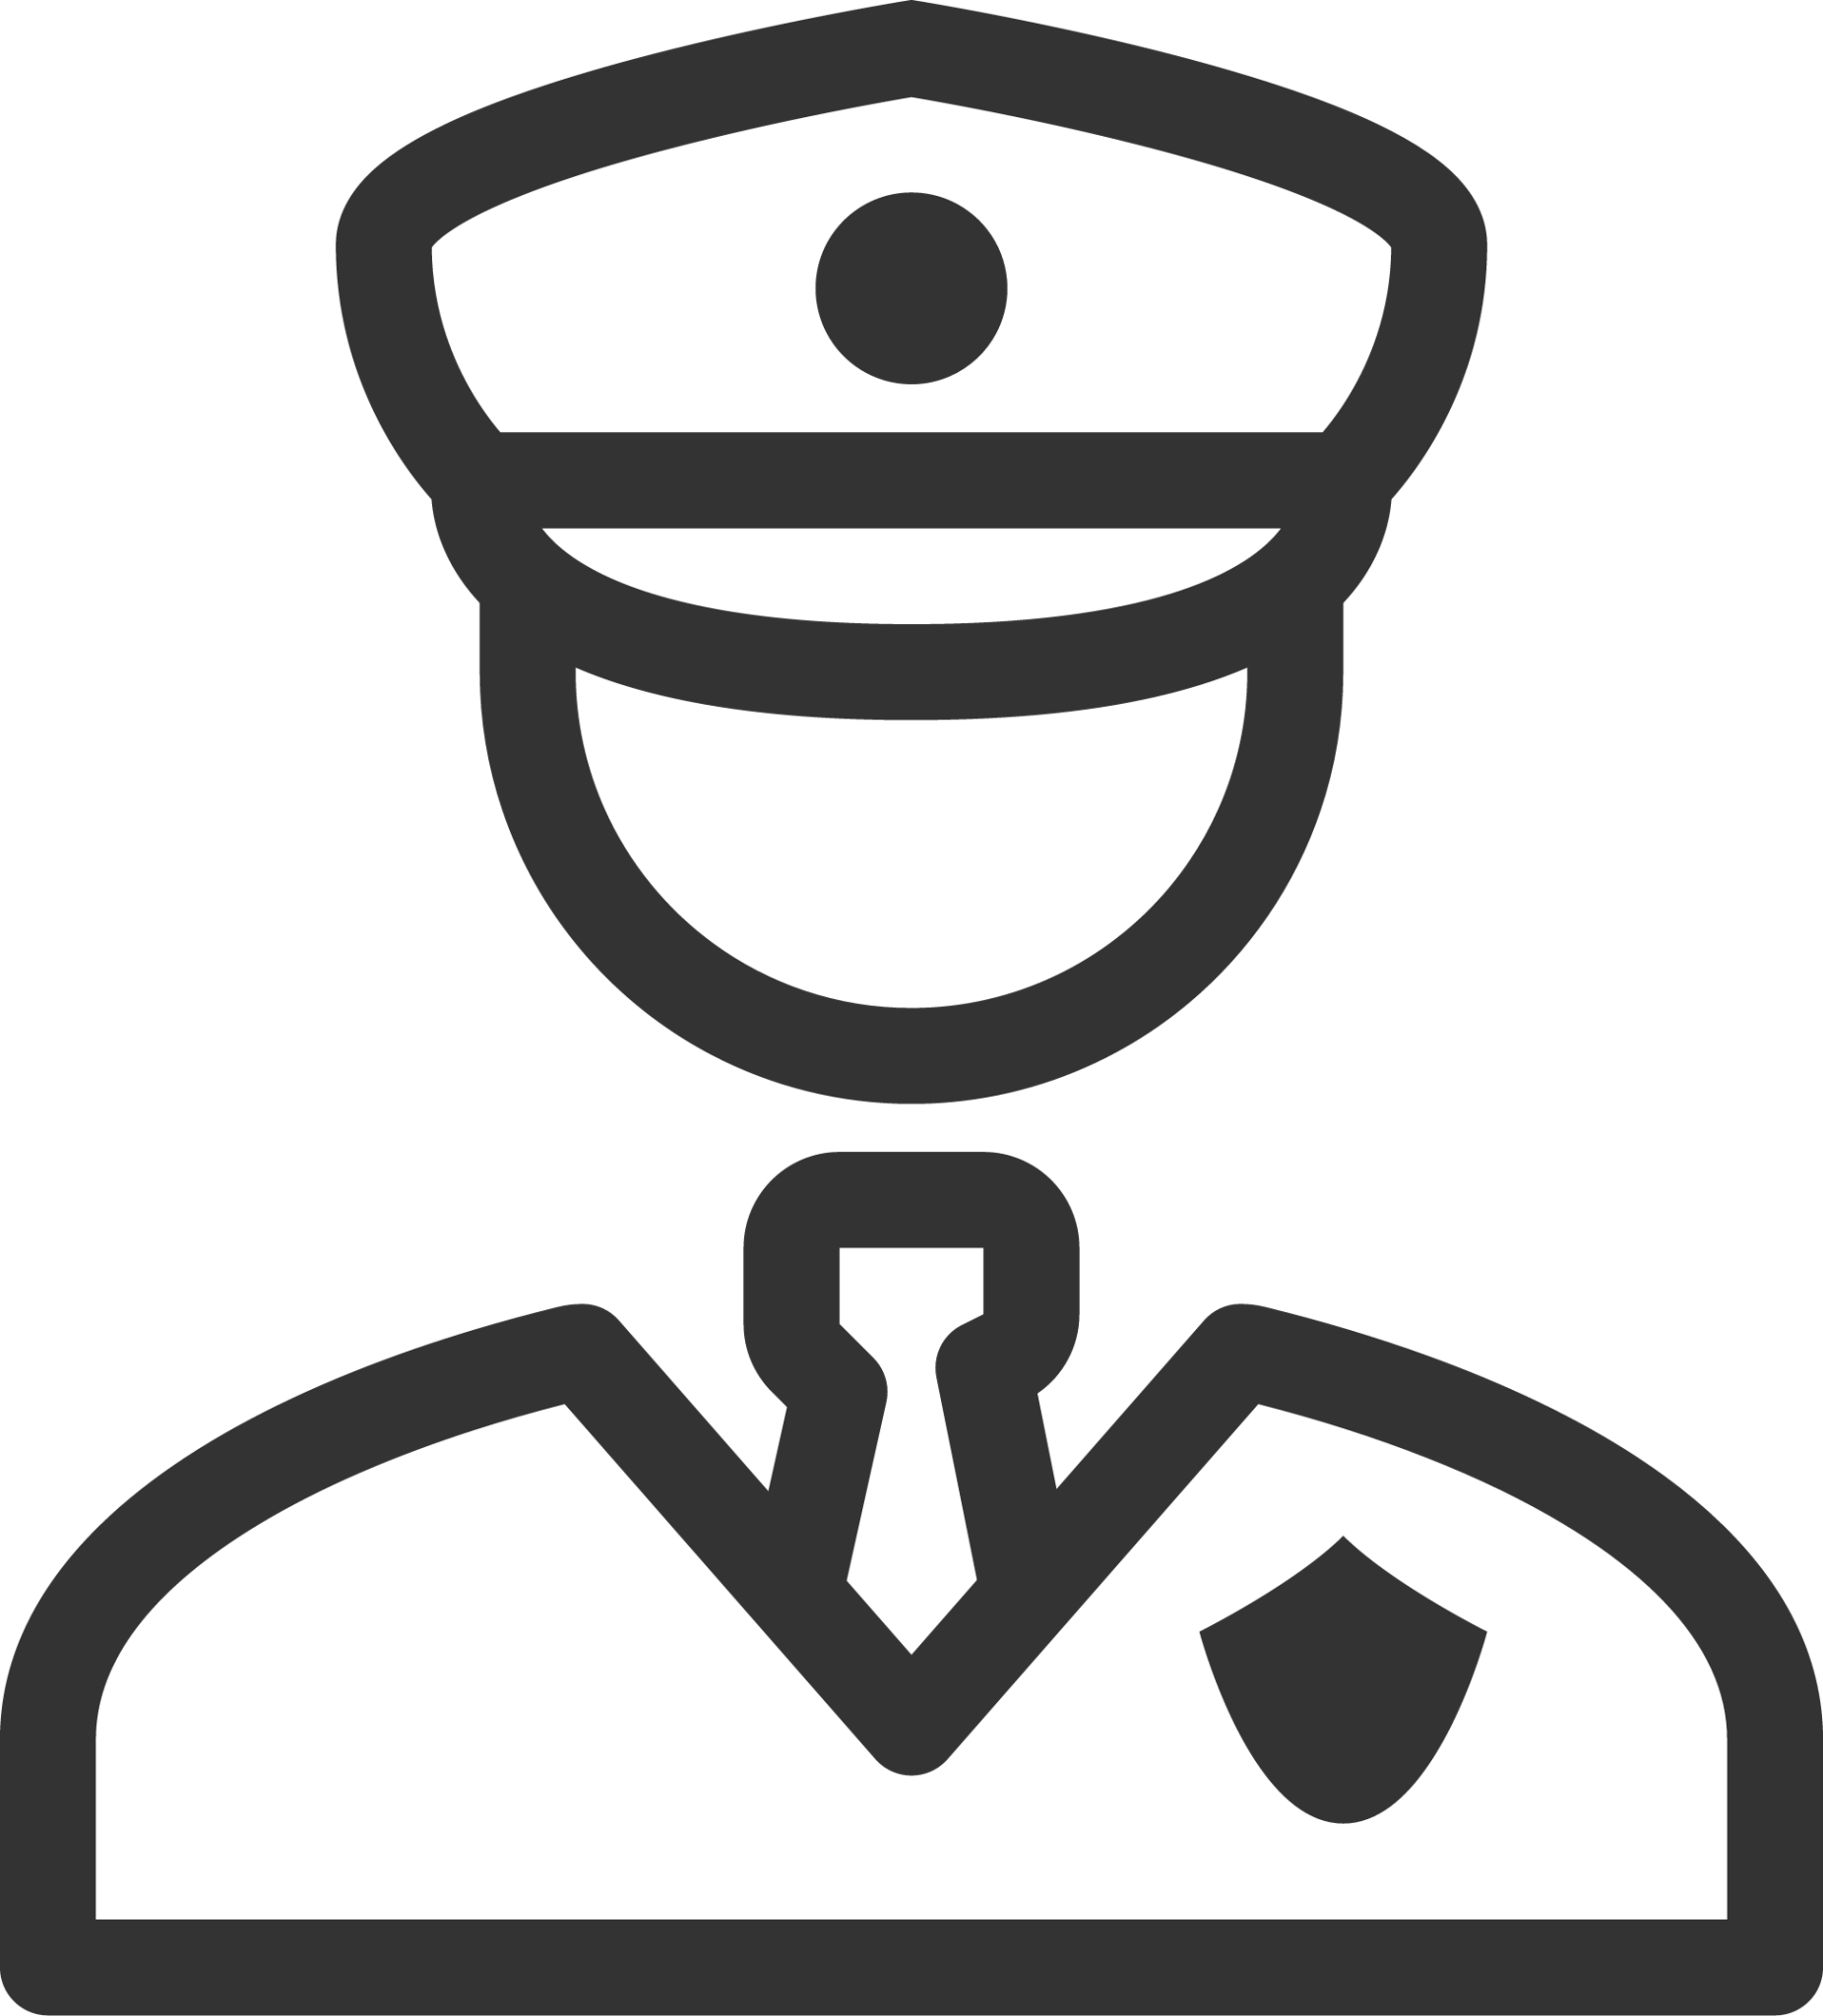 Security Worker icon